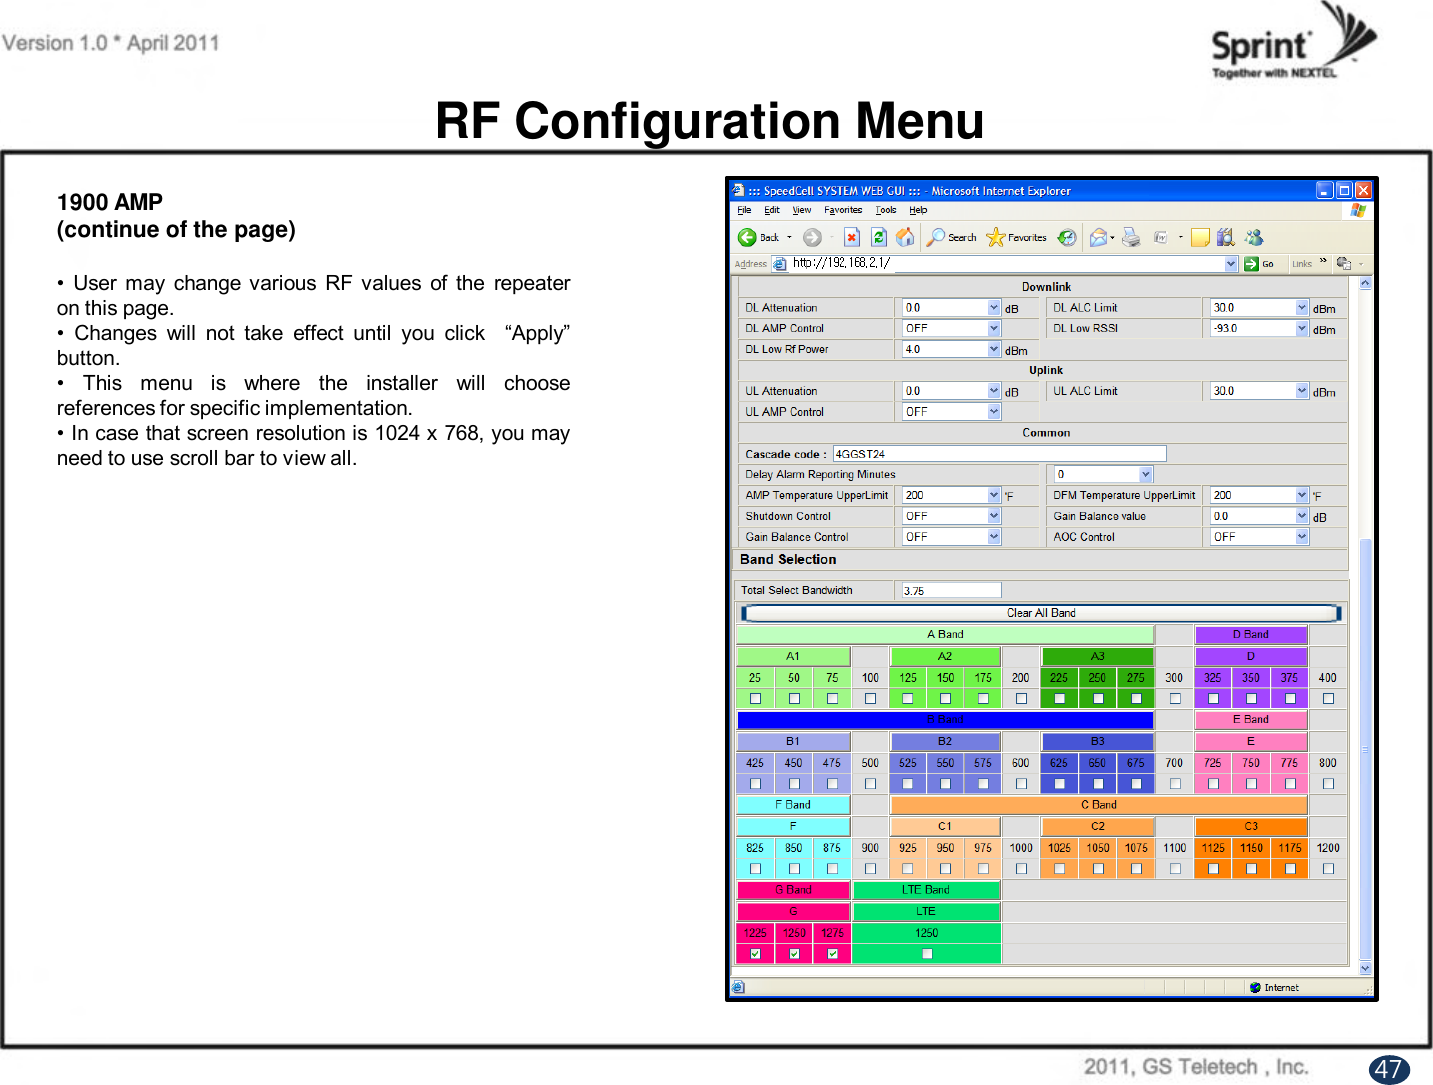 RF Configuration Menu1900 AMP(continue of the page)• User may change various RF values of the repeateron this page.•Changes will not take effect until you click “Apply”button.• This menu is where the installer will choosereferences for specific implementation.•In case that screen resolution is 1024 x768, you mayneed to use scroll bar to view all.47